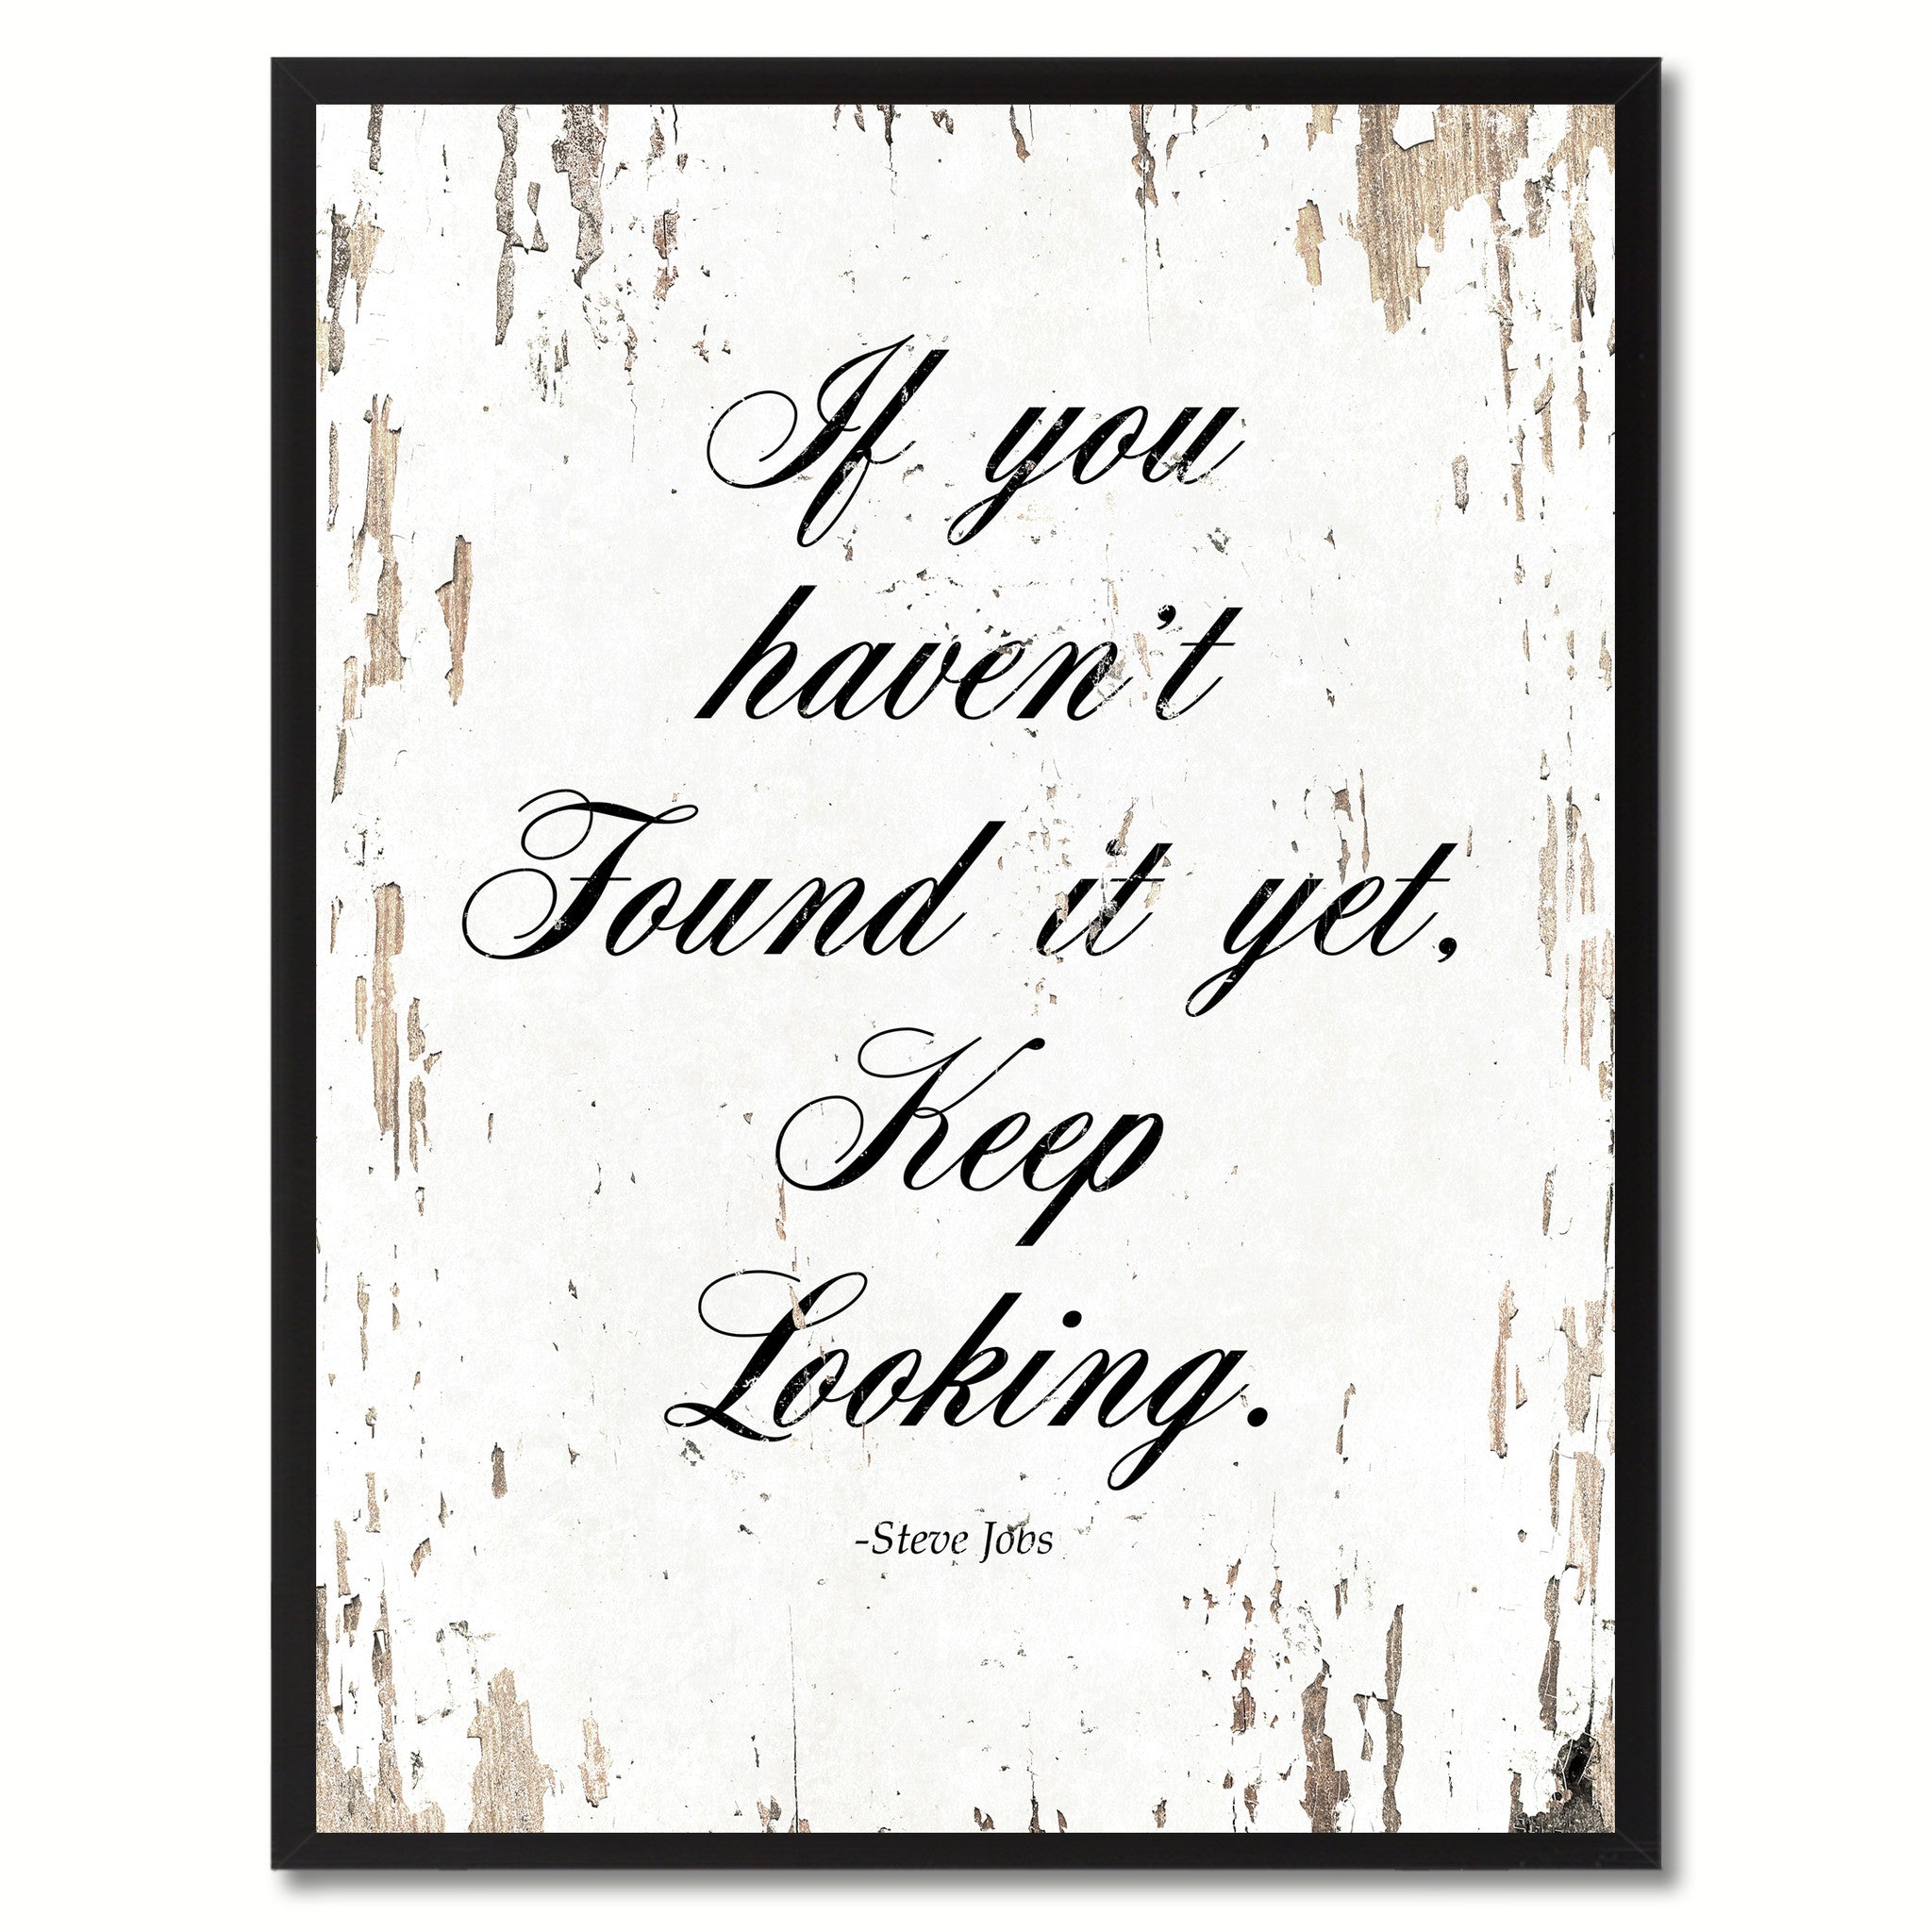 If you haven't found it yet keep looking - Steve Jobs Motivational Quote Saying Canvas Print with Picture Frame Home Decor Wall Art, White